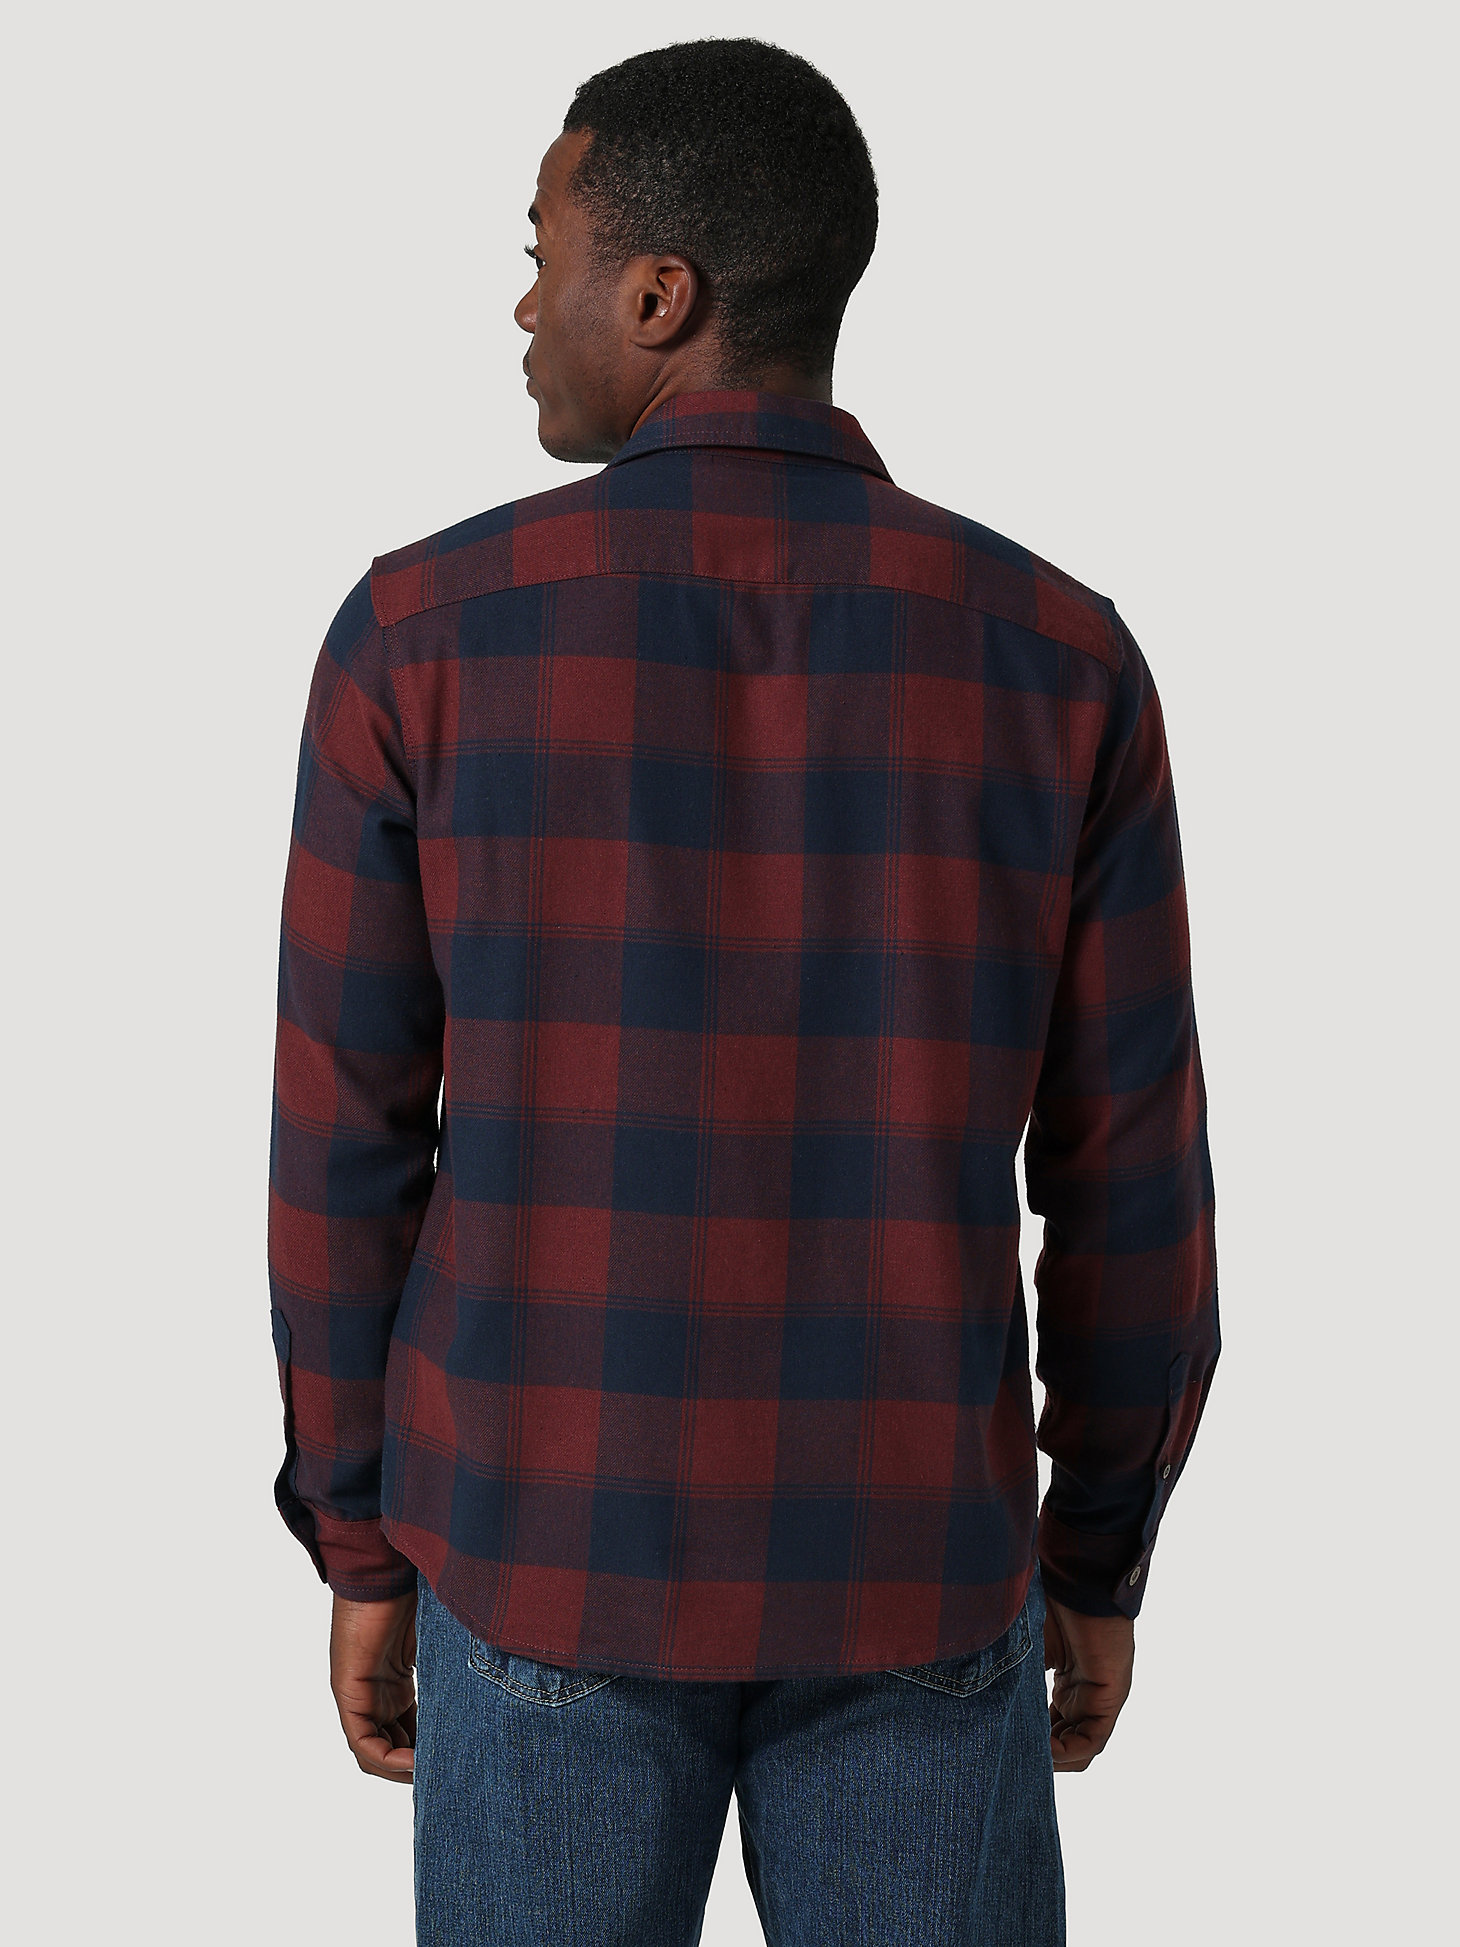 Men's Epic Soft Brushed Flannel Plaid Shirt in Decadent Chocolate alternative view 1